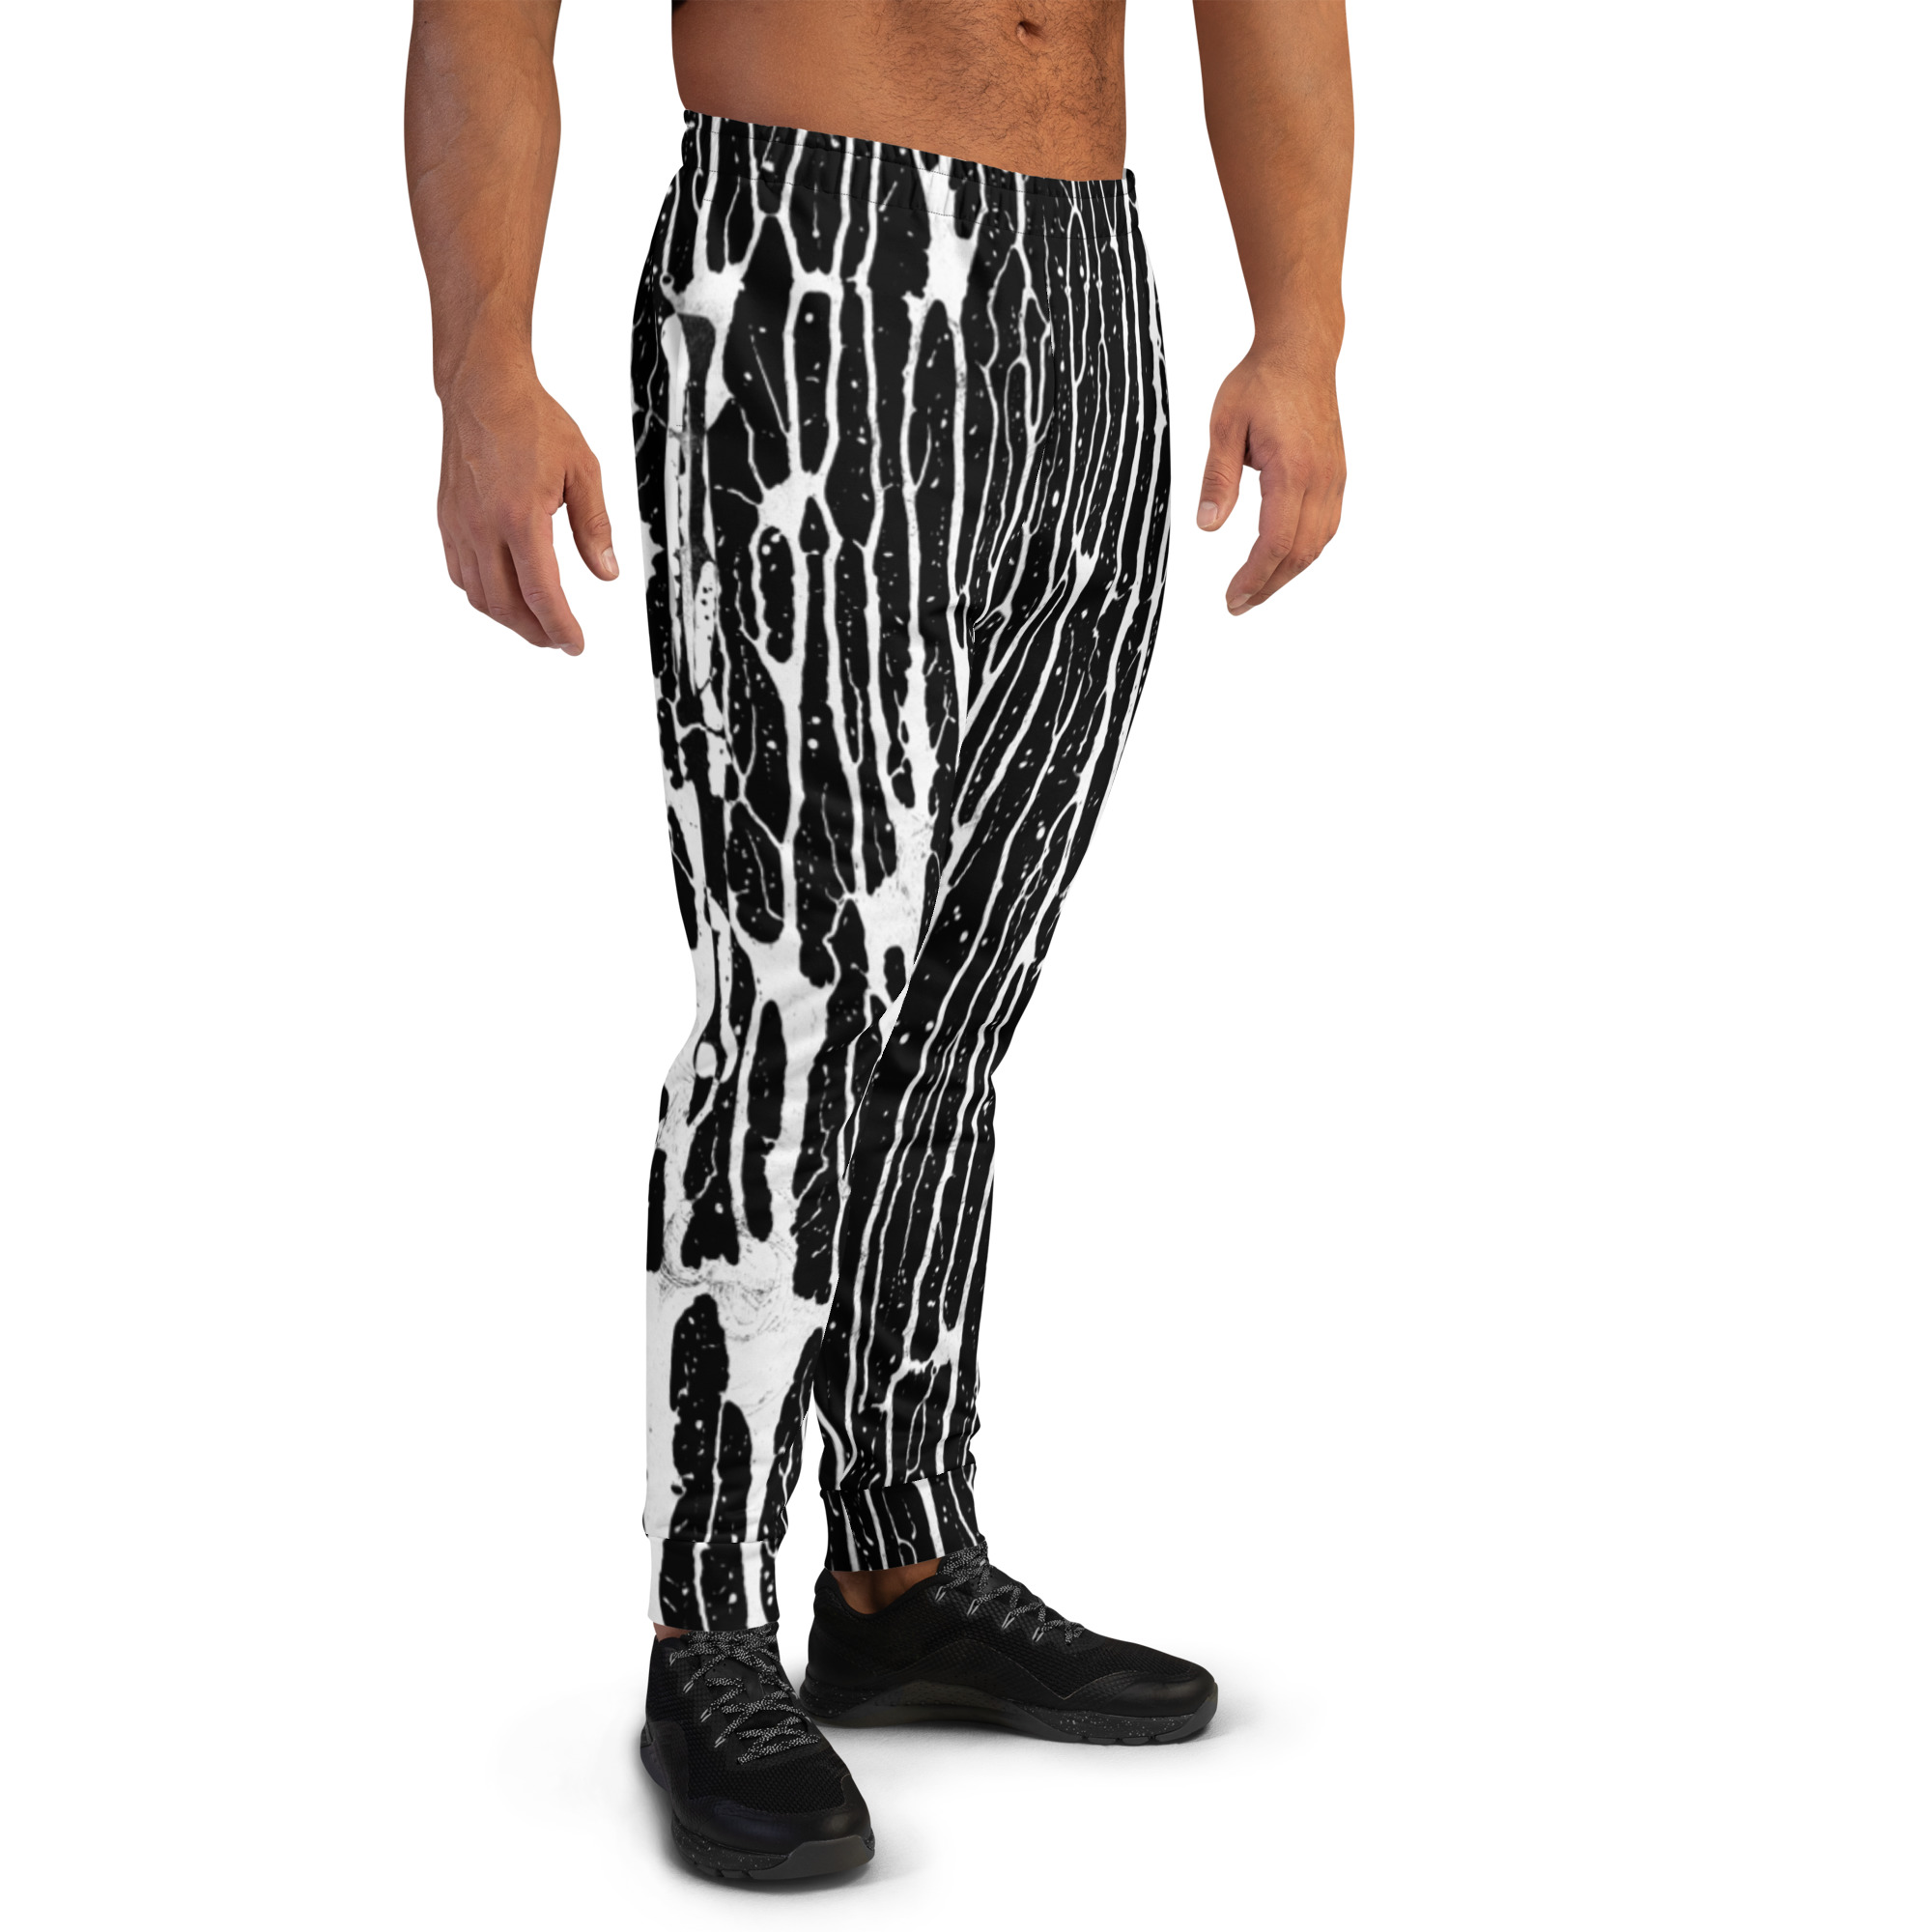 Featured image for “Grunge drip bones - Men's Joggers”